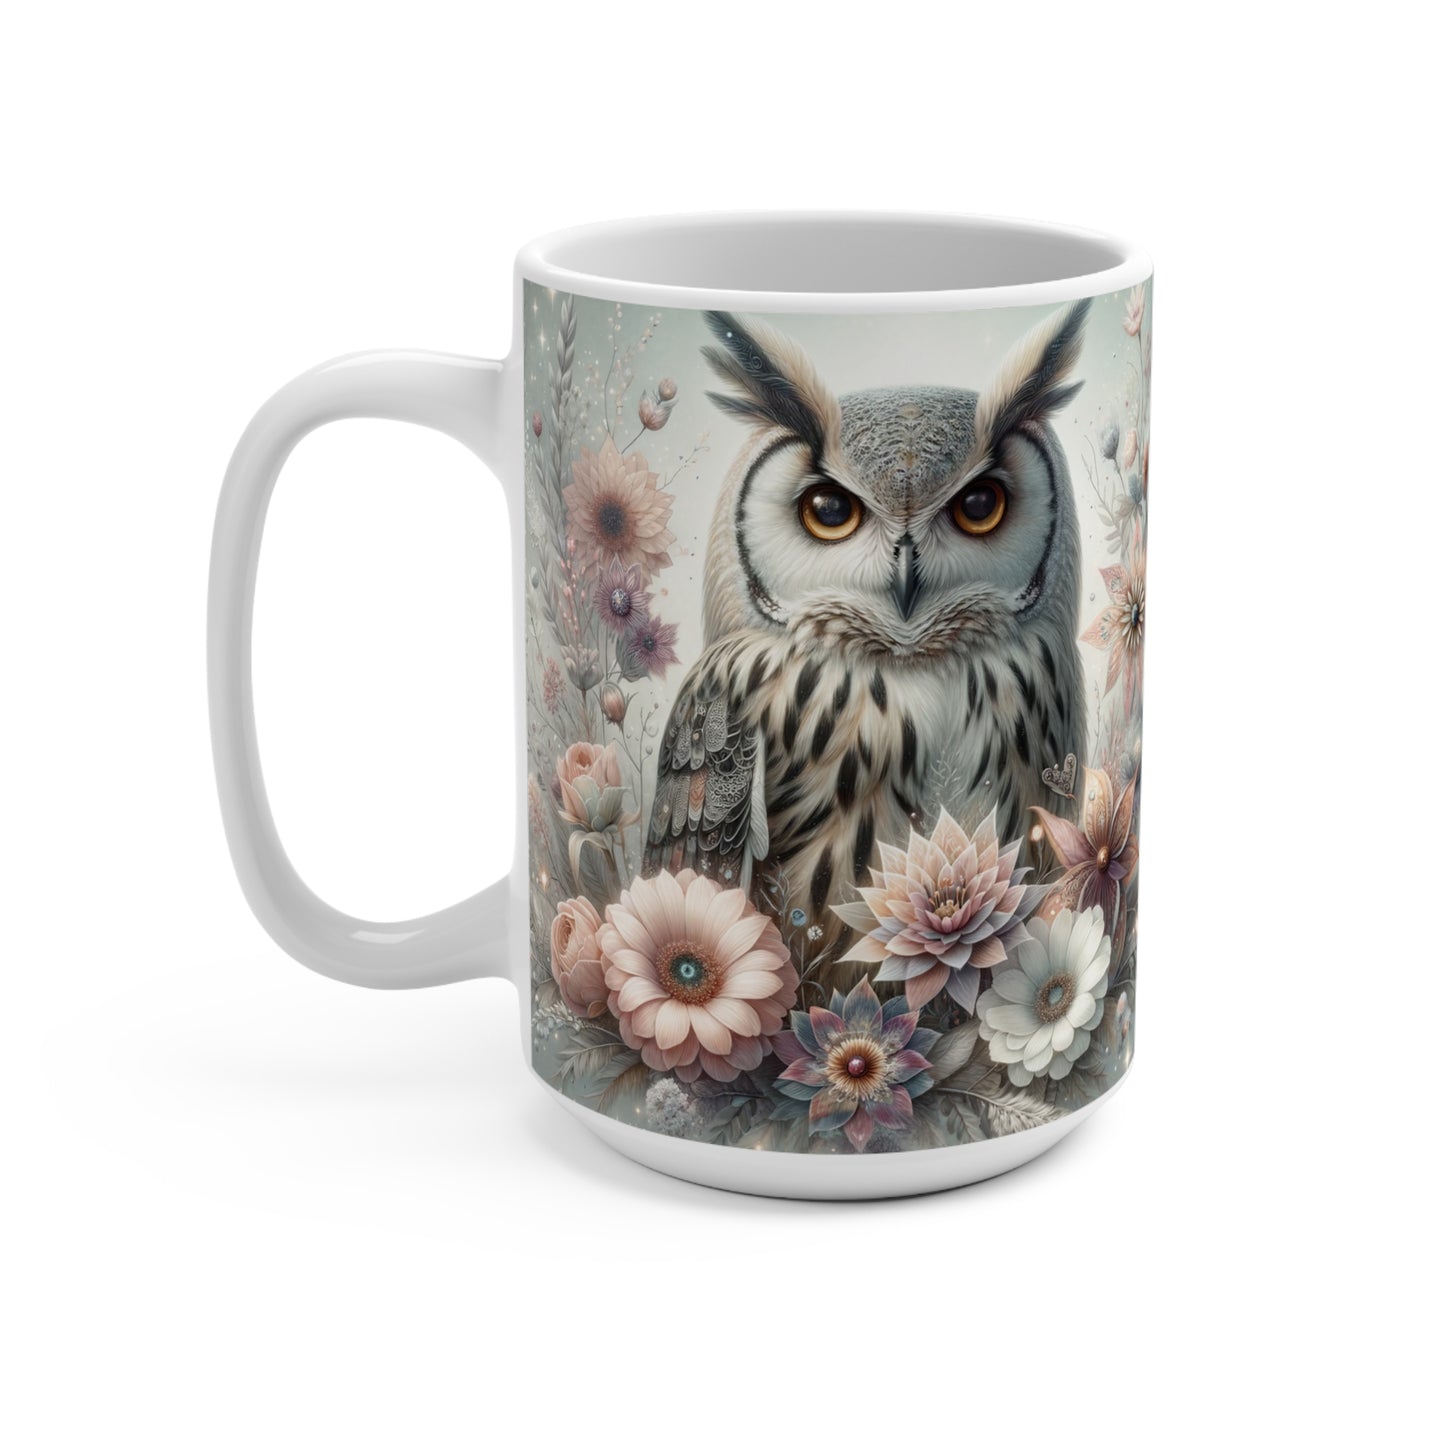 Enchanted Forest Owl Mug - Whimsical Owl and Flowers Coffee Cup, Magical Fantasy Kitchen Decor, Unique Gift for Owl Lovers, Unique Gift Idea, Mug 15oz